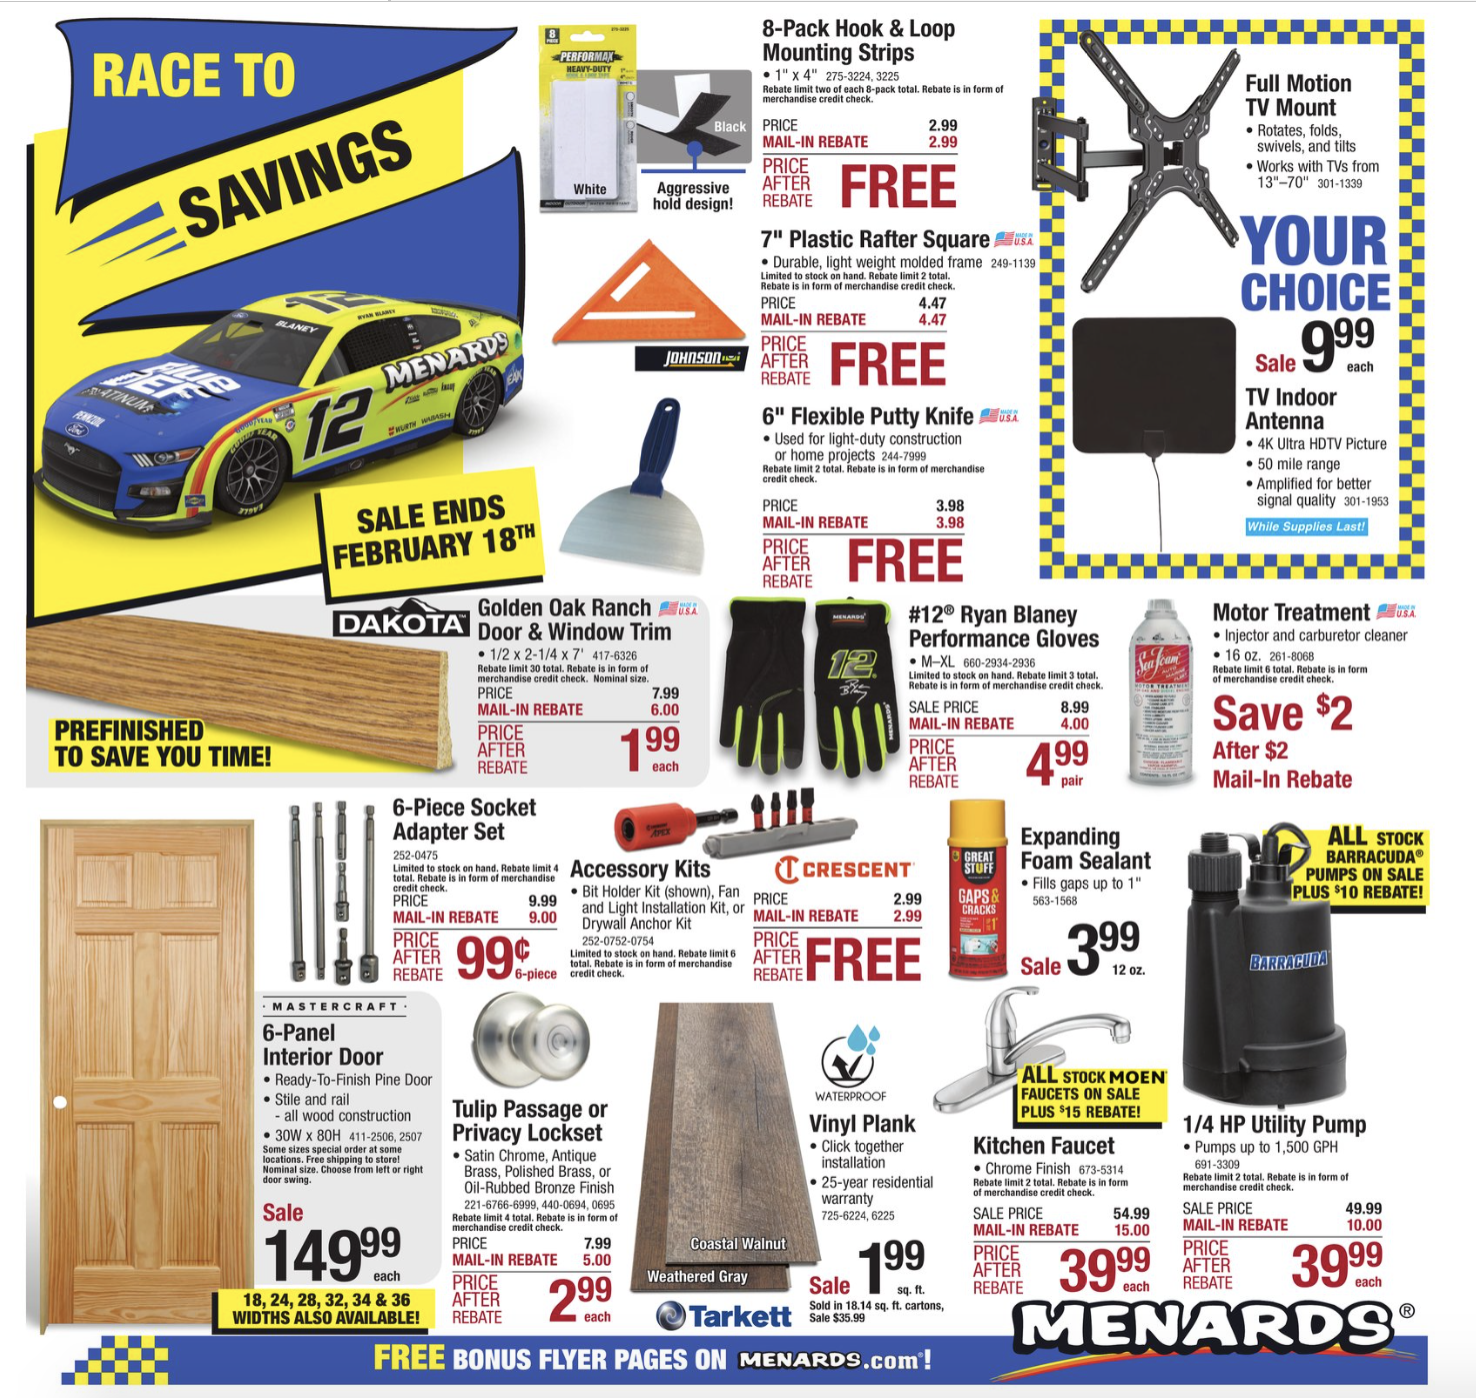 Menards Ad with Free After Rebate Items